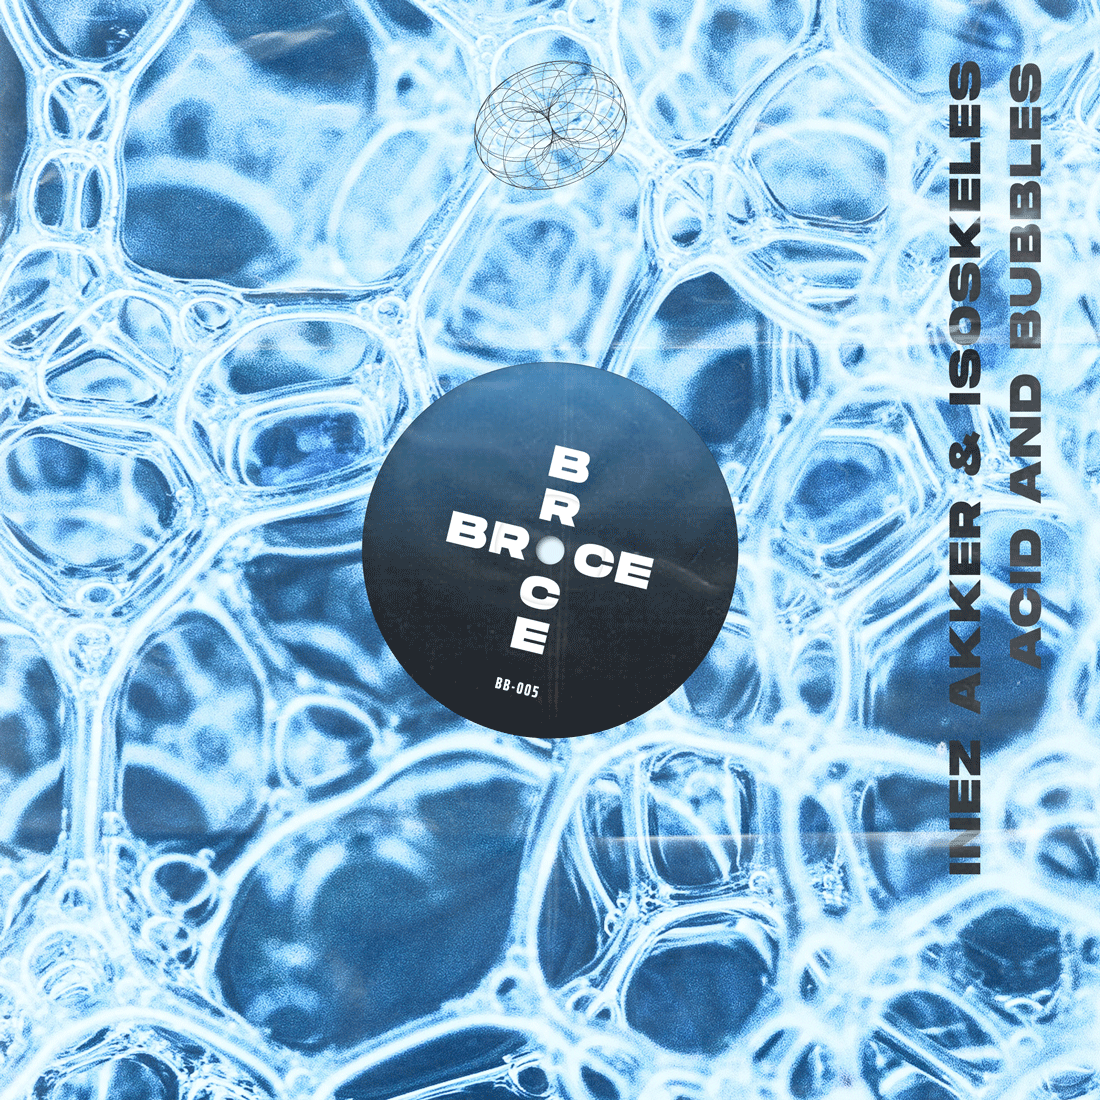 Inez Akker & Isoskeles joined forces in their collaborative EP “Acid and Bubbles”